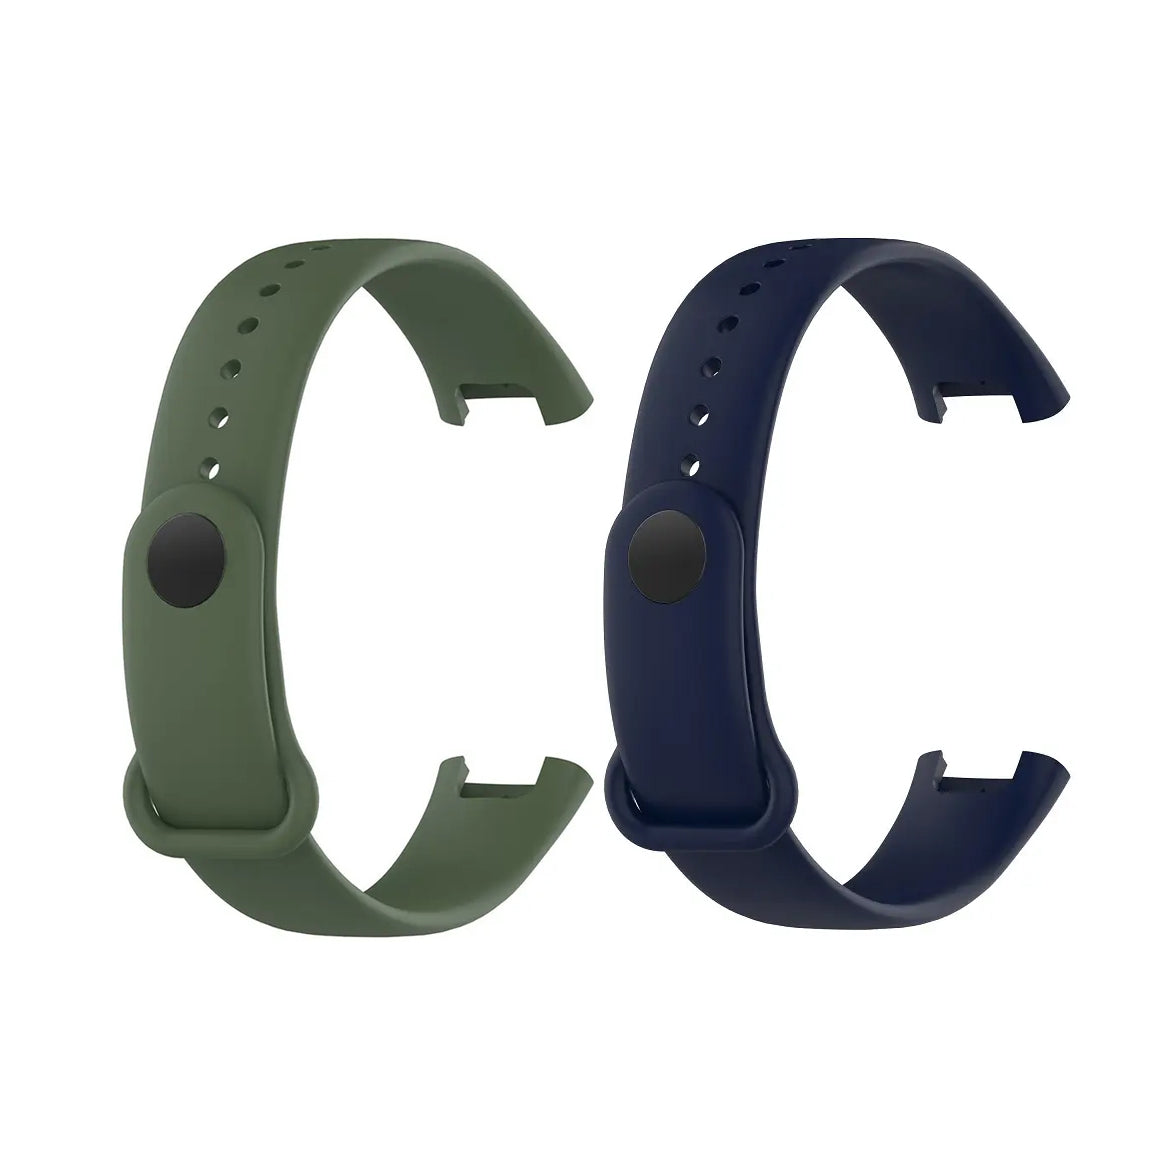 Compatible with Xiaomi Band 8 Active Replacement Band - Replacement  Silicone Wrist Watch Band Strap Compatible with Xiaomi Band 8 Active/Redmi  Band 2